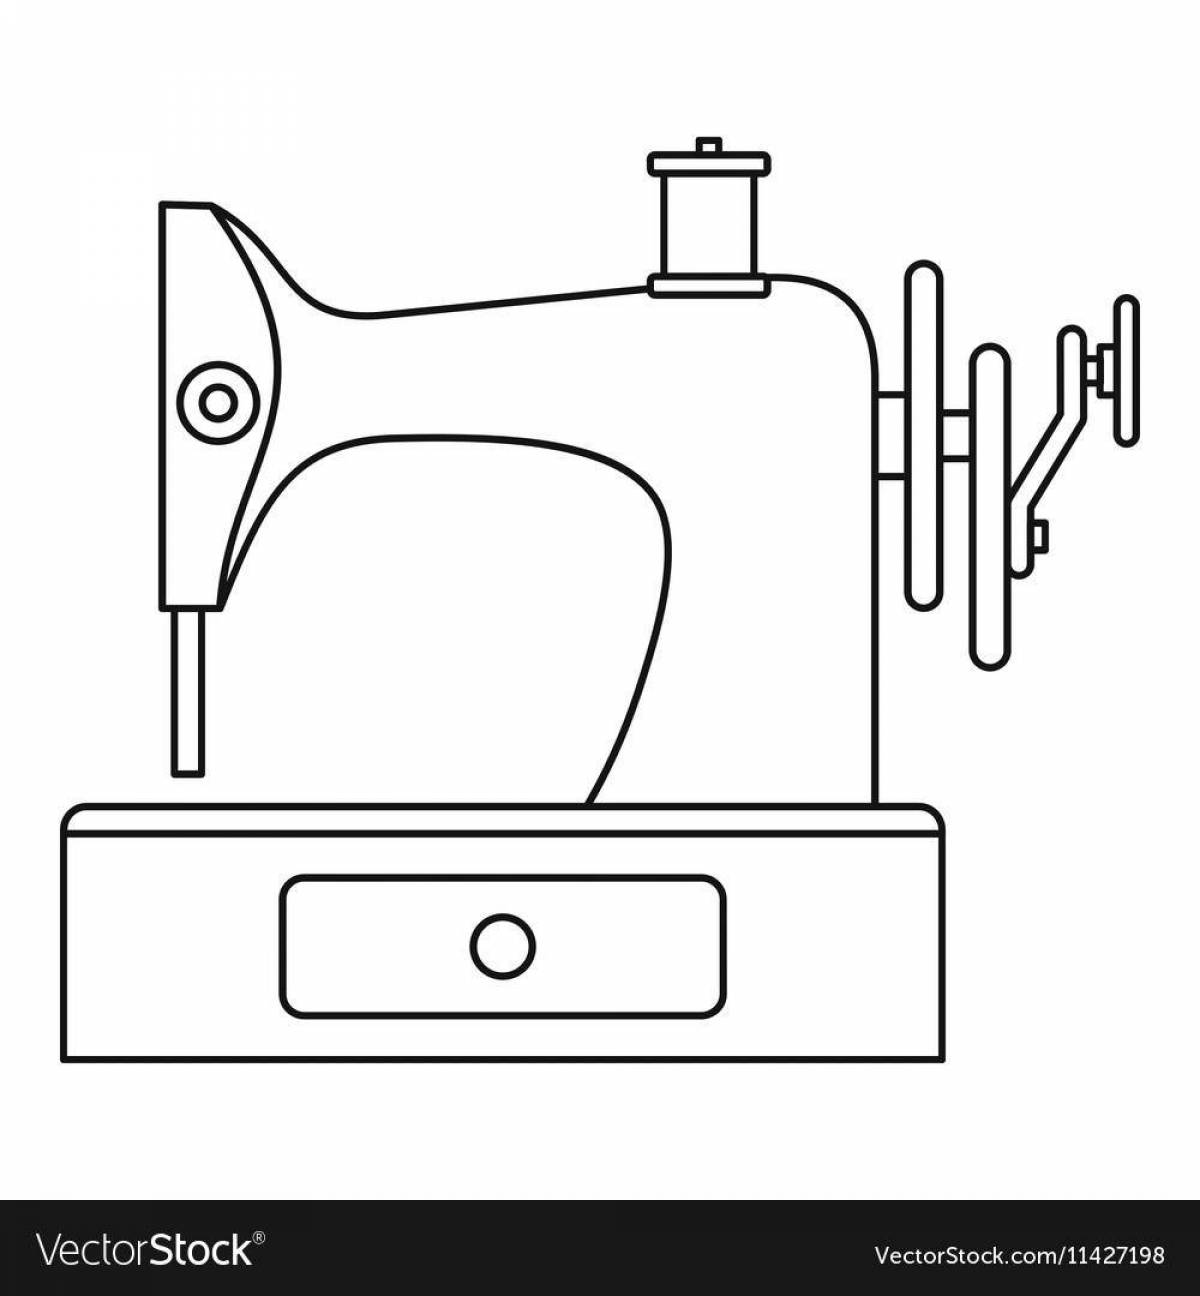 Playful sewing machine coloring page